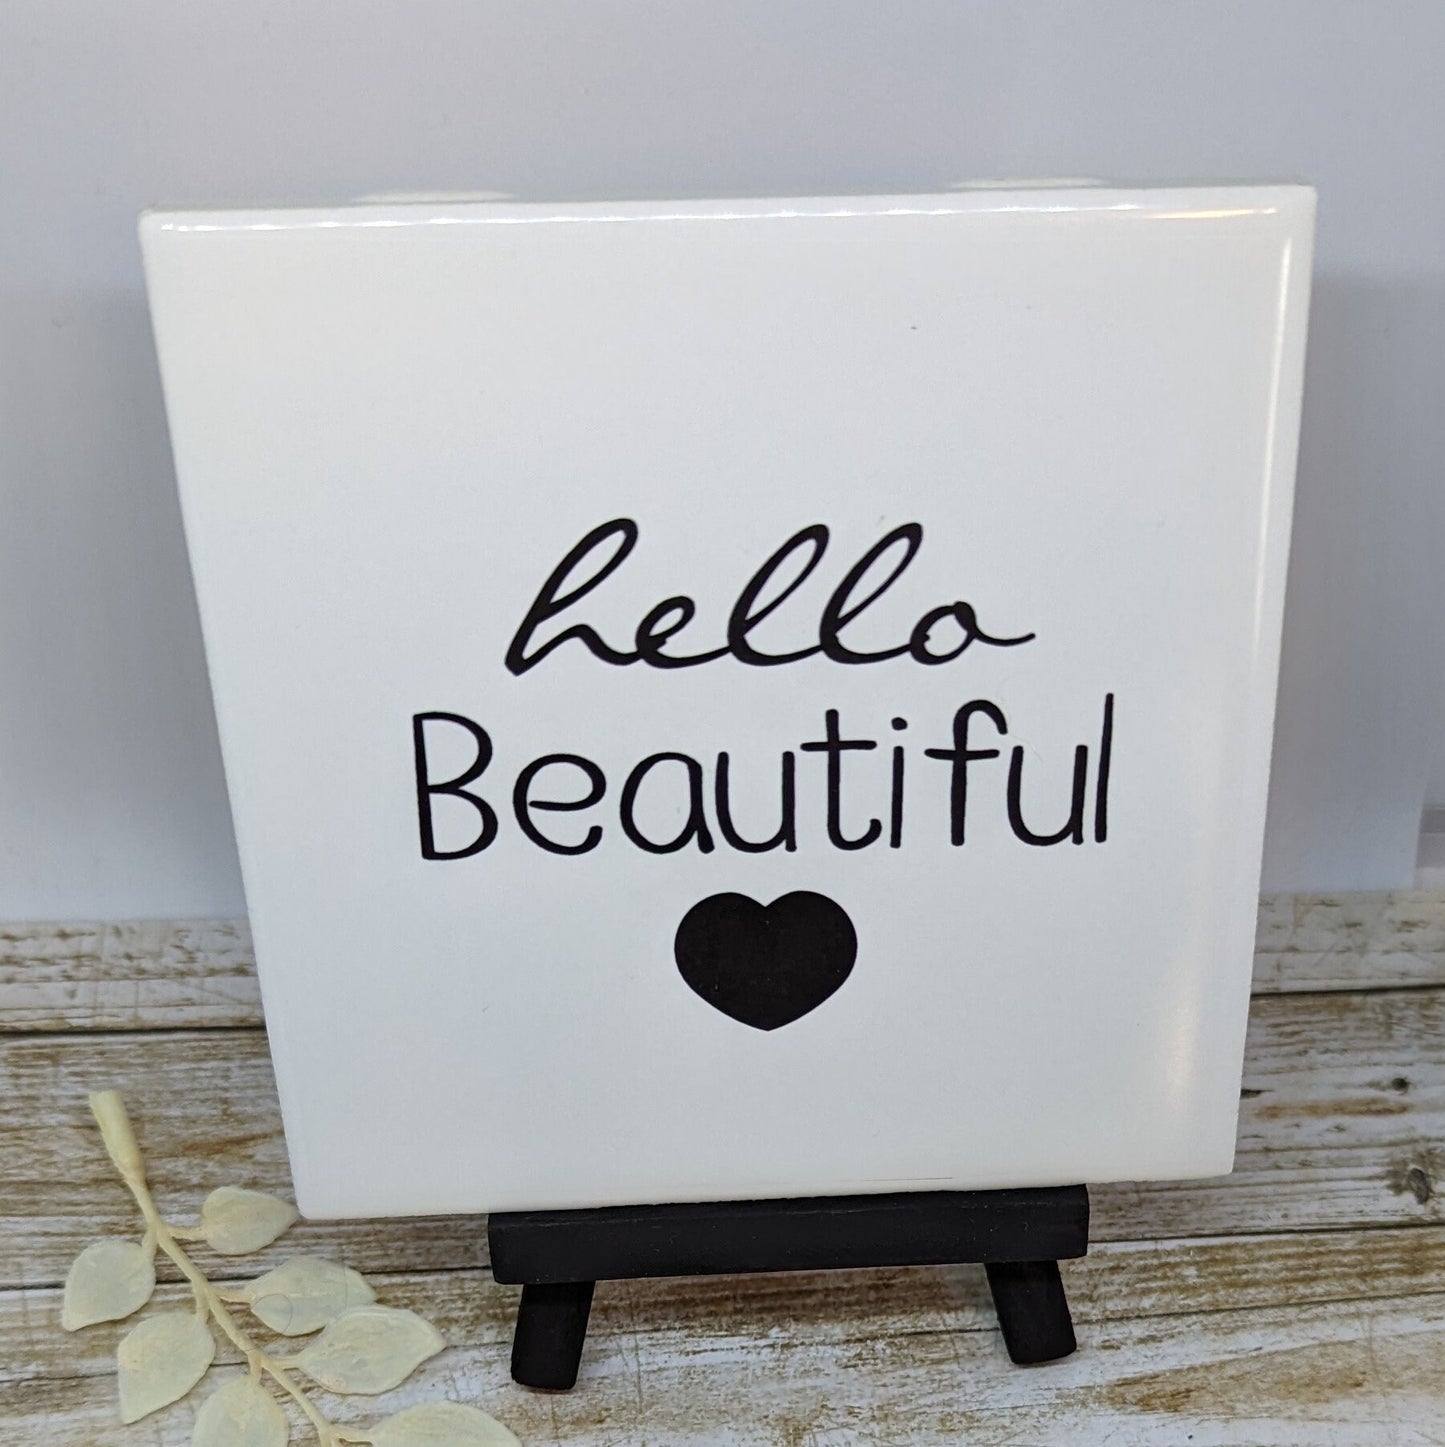 Hello Beautiful Mini Easel Sign - easel included, your color choice